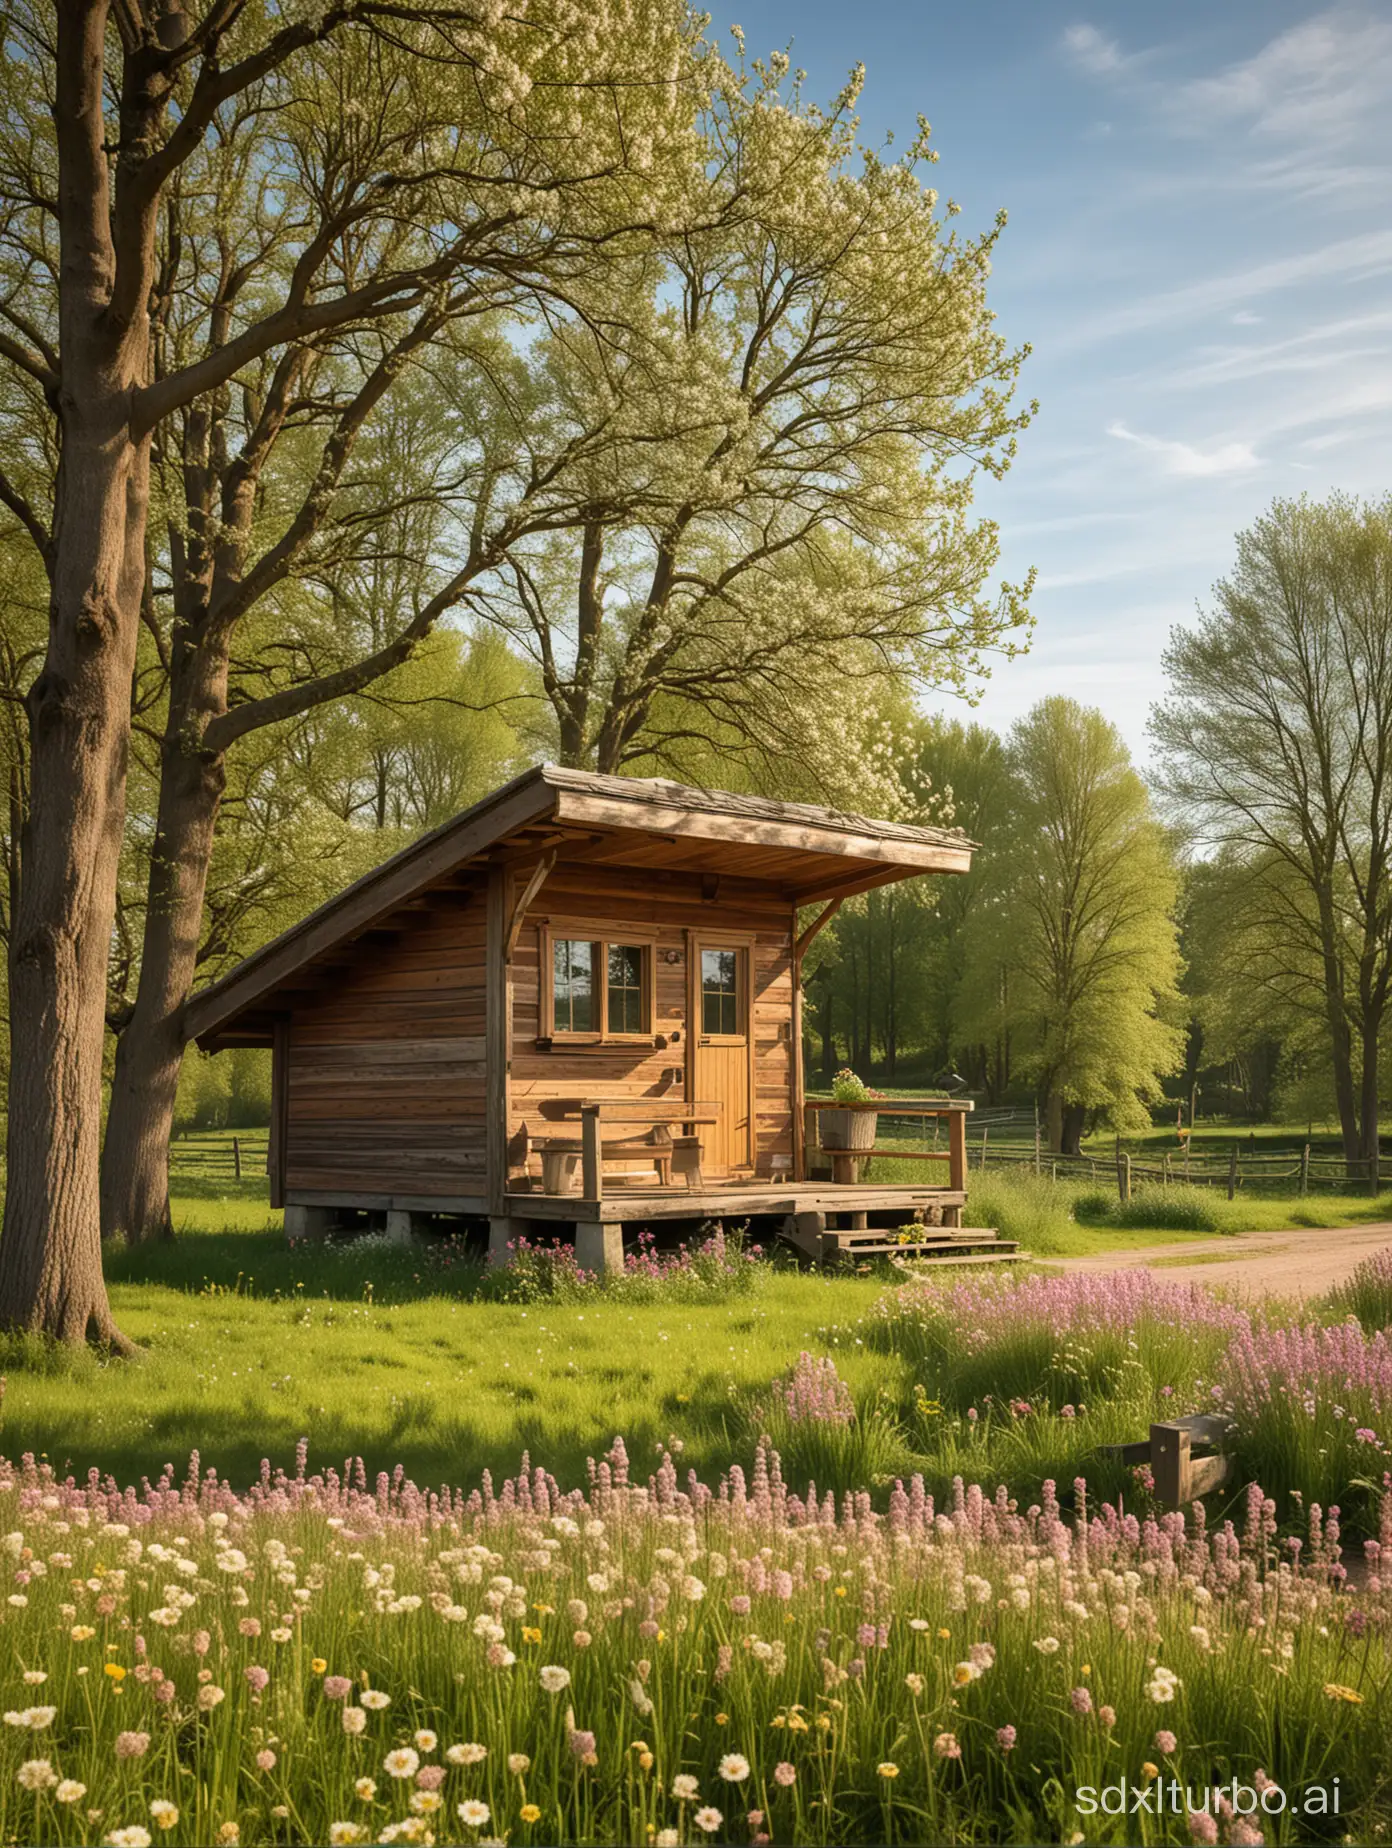 A digital potrayal of Mulda in the heart of Mettelsachen,a wooden cabin, enbematic of rural german architechture,stands amid a flowering meadow under the soft spring sunlight, this embodies the peaceful essence of the saxony countryside,inviting viewers to relish the vibrant colors and calming sounds of nature's rebirth